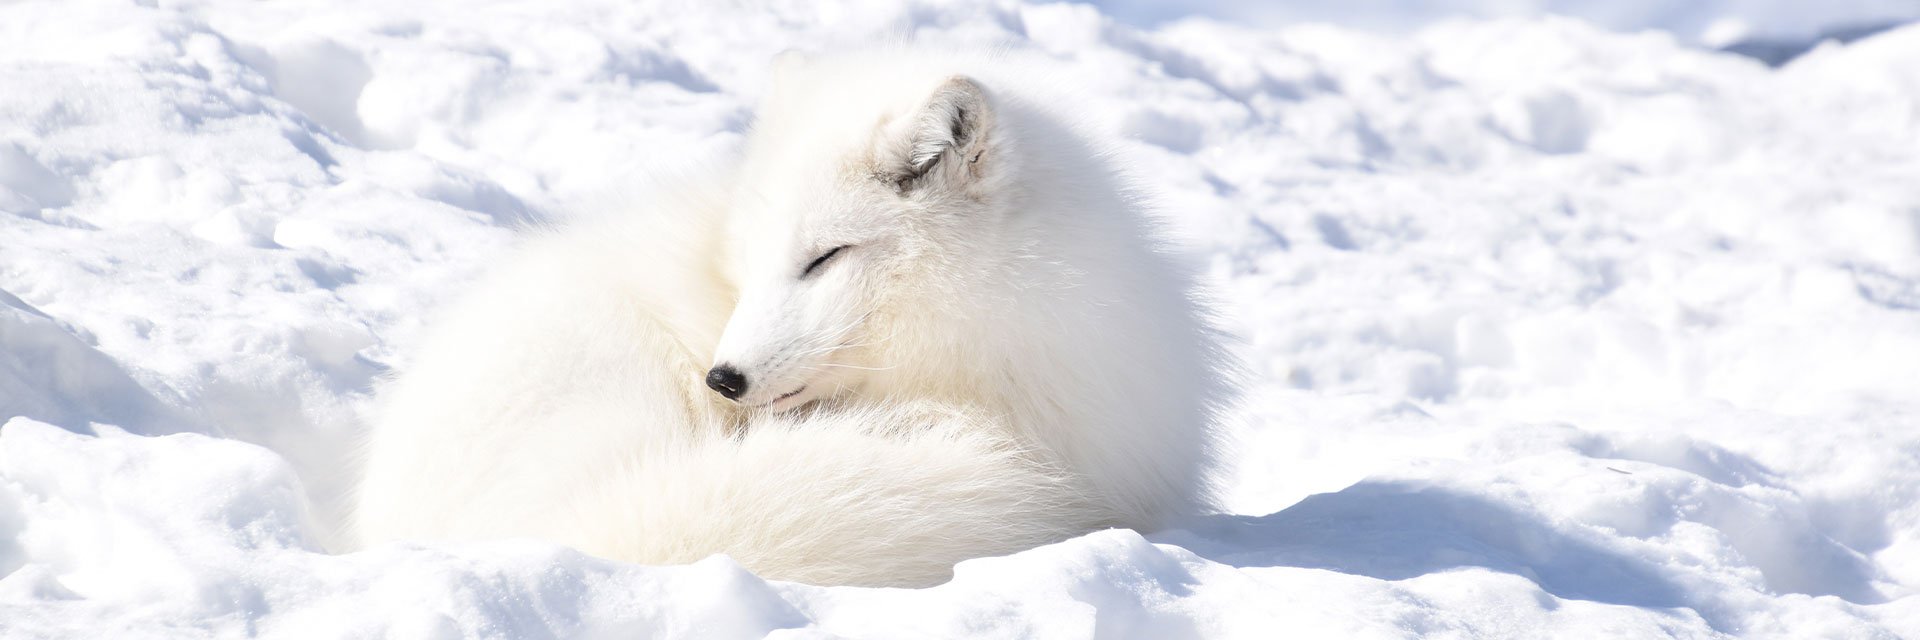 A arctic fox is sunbathing in the snow.